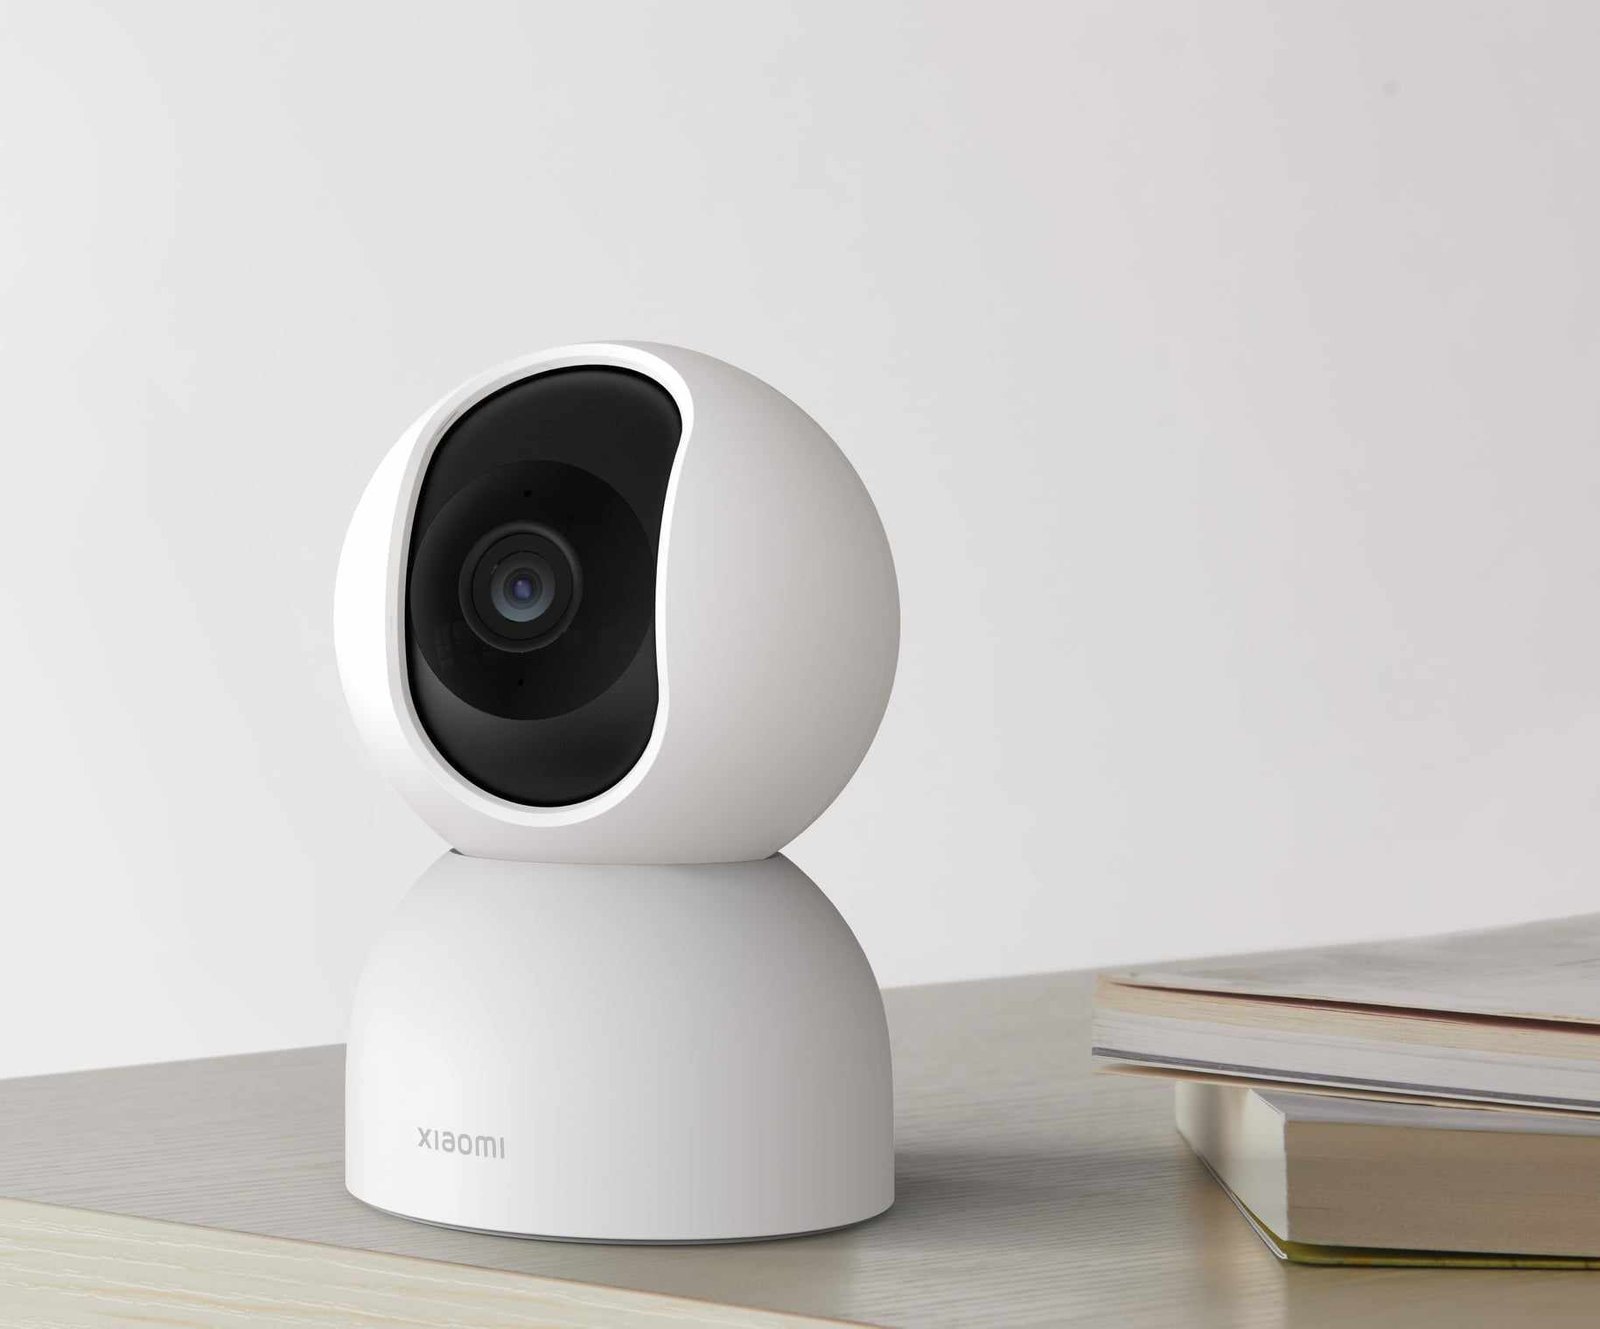 The Xiaomi Smart Cameras Why its the must have CCTV upgrade for your smart home